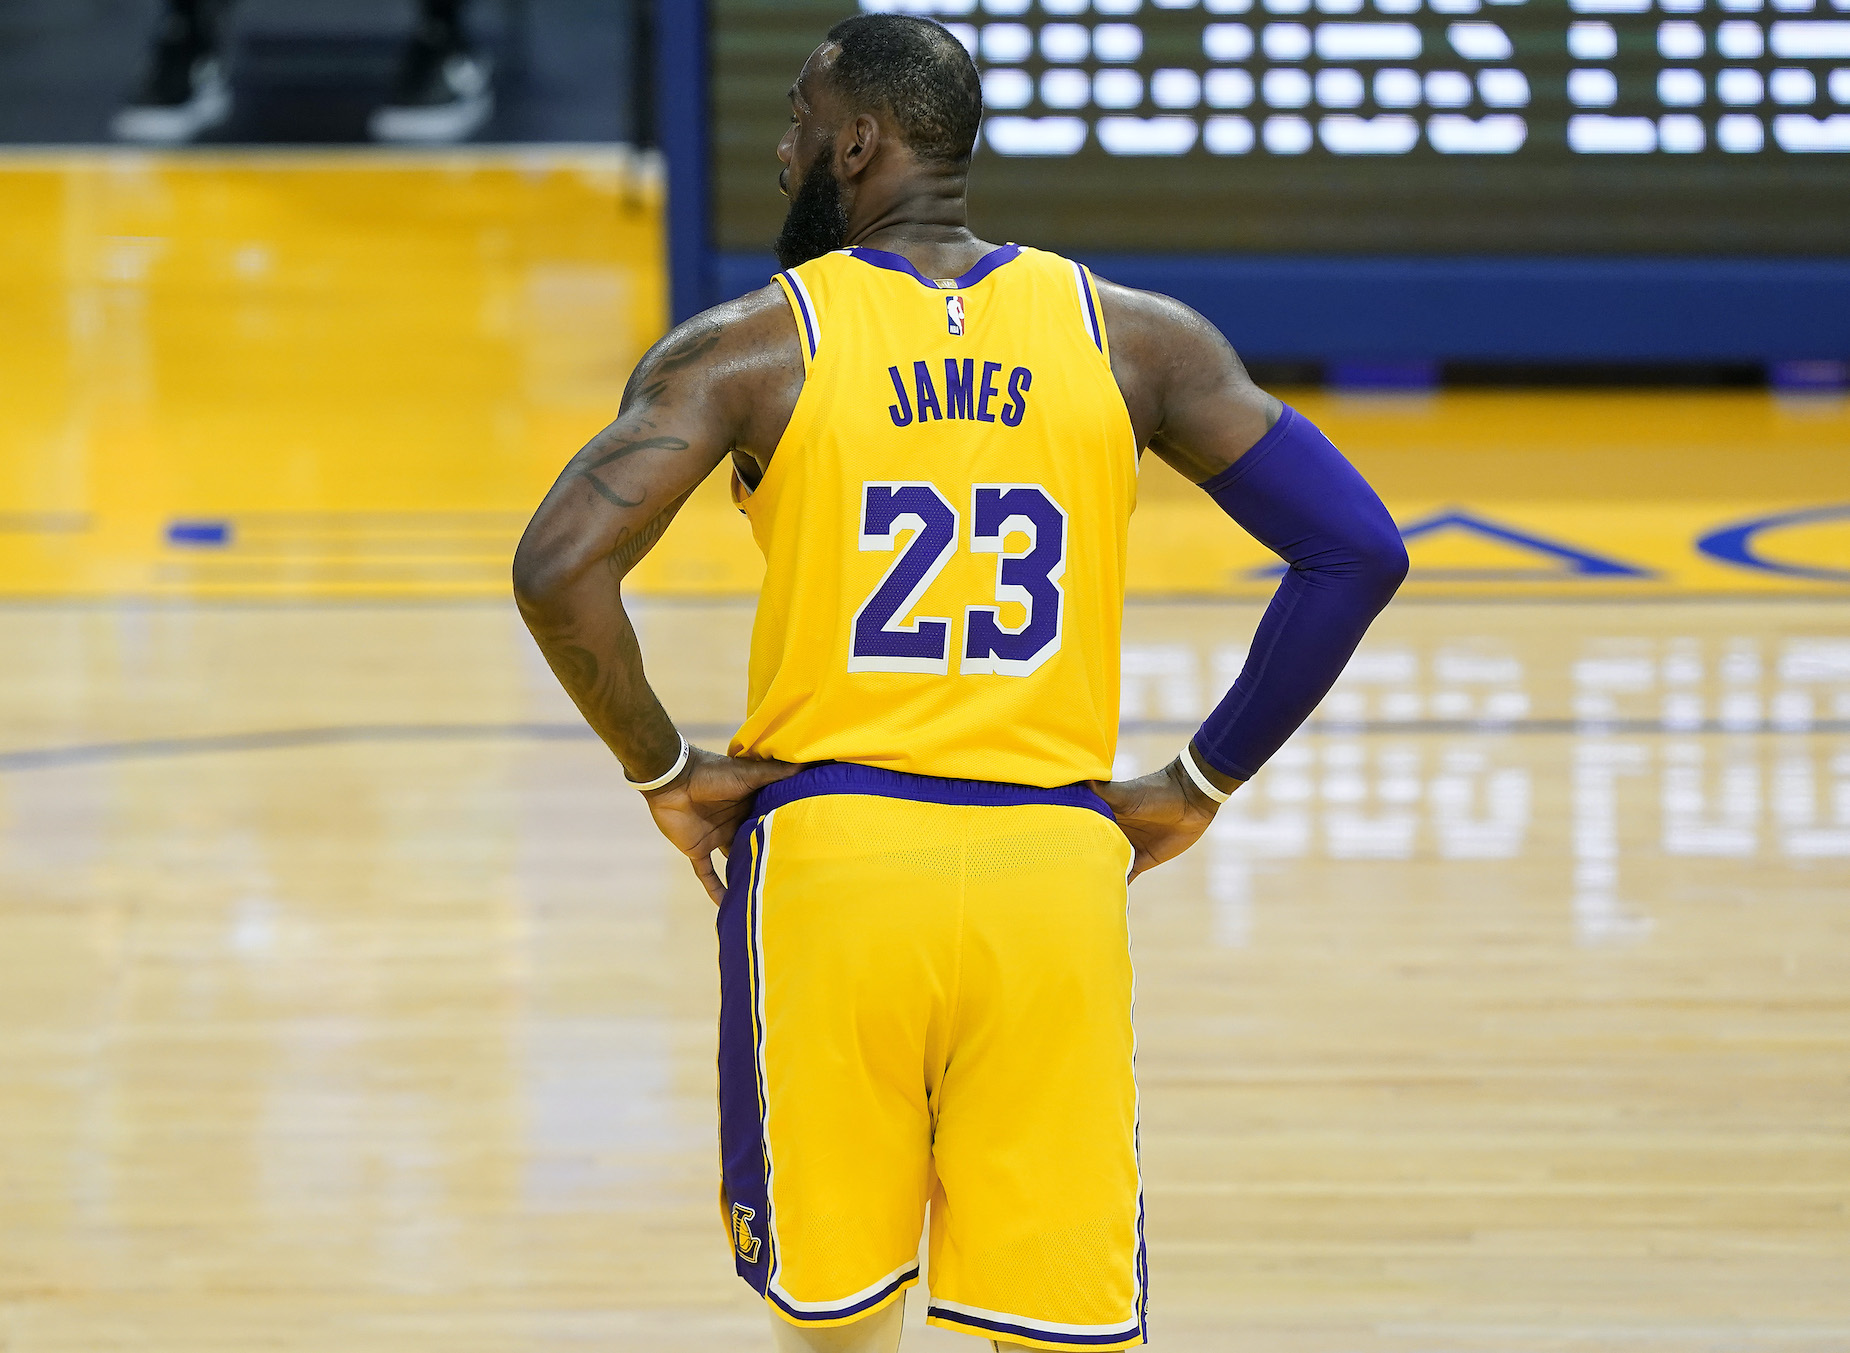 LeBron James stands on the court for the LA Lakers.